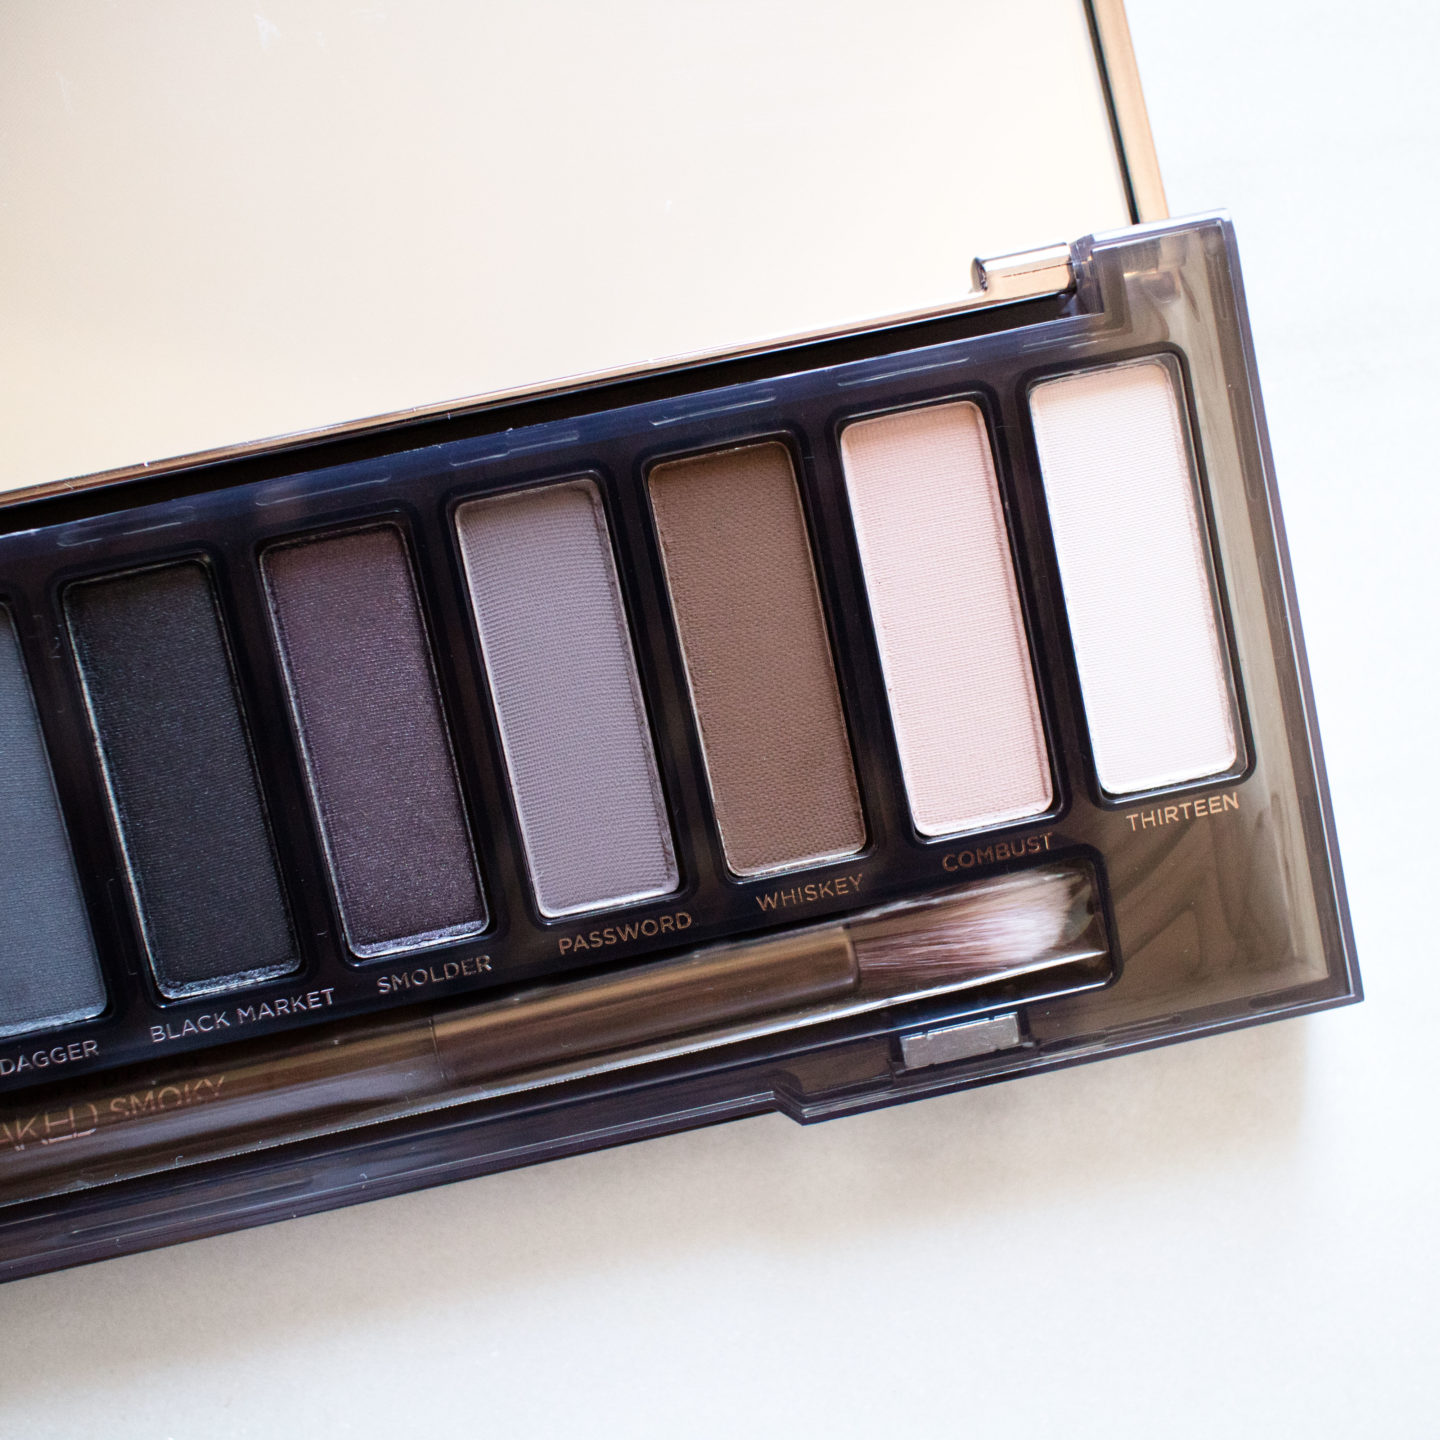 The Beauty Vanity Urban Decay Naked Smoky Palette Swatches Review.